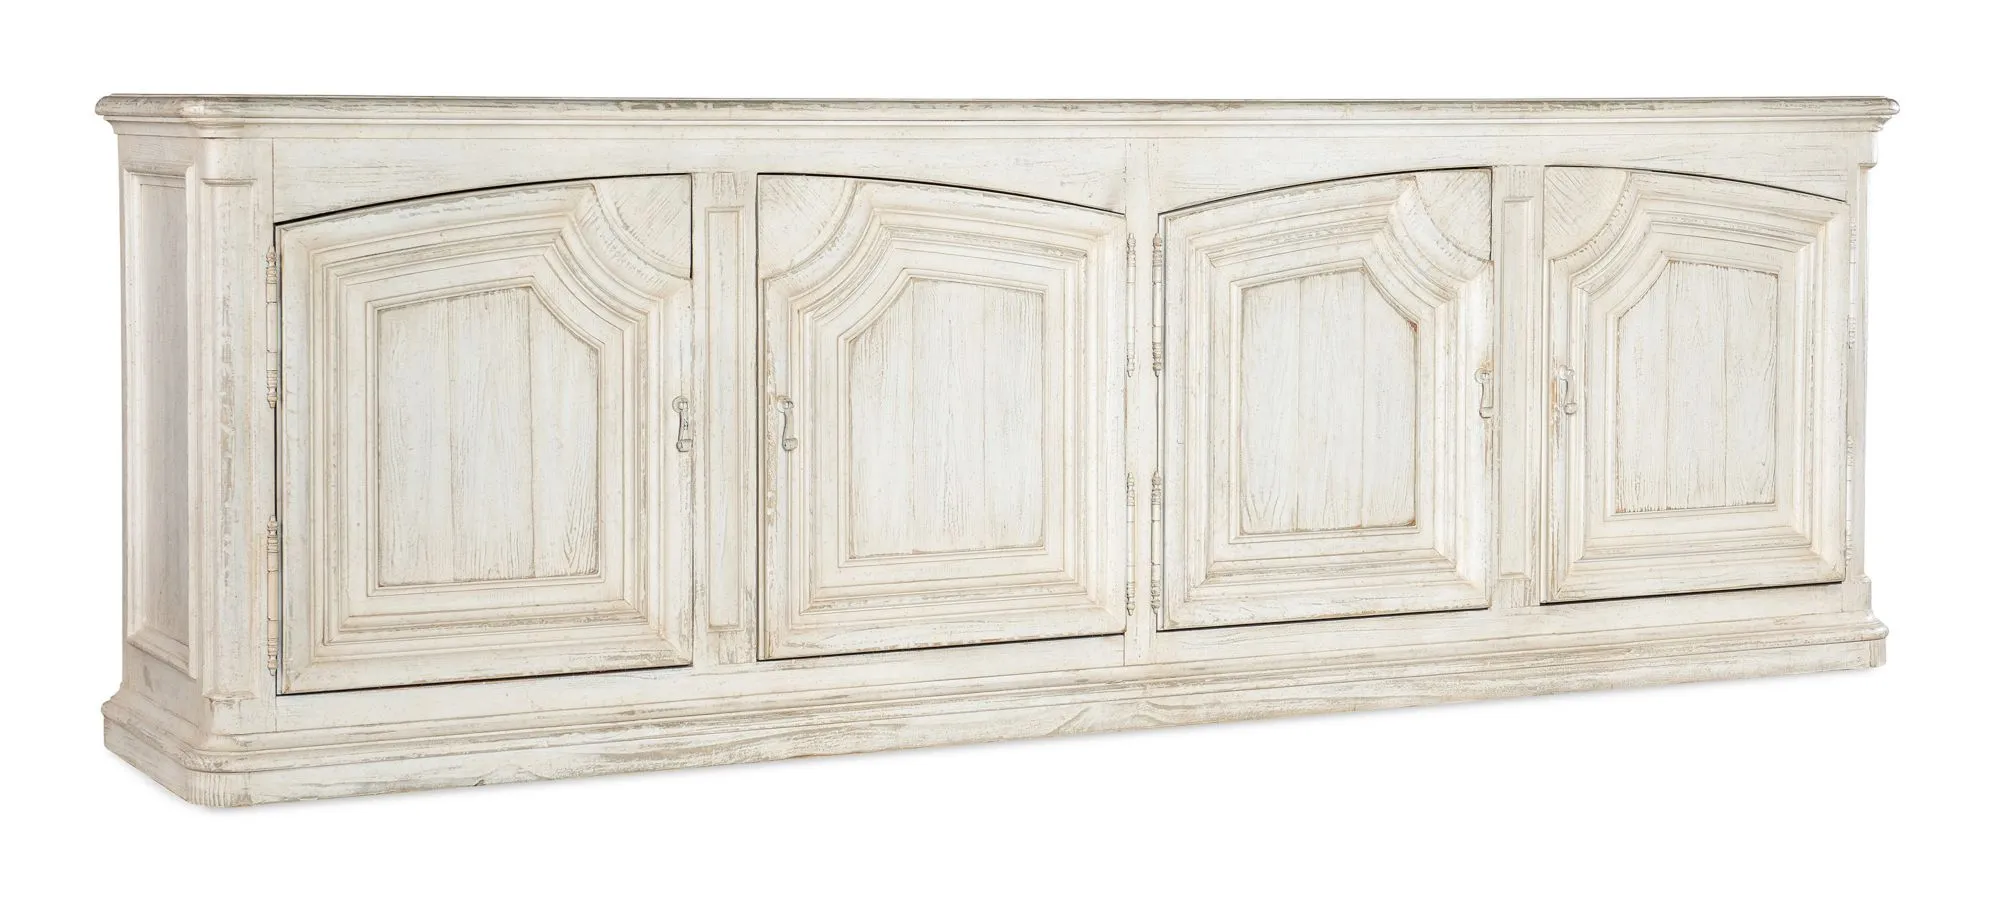 Traditions Credenza in Magnolia: a soft white finish by Hooker Furniture